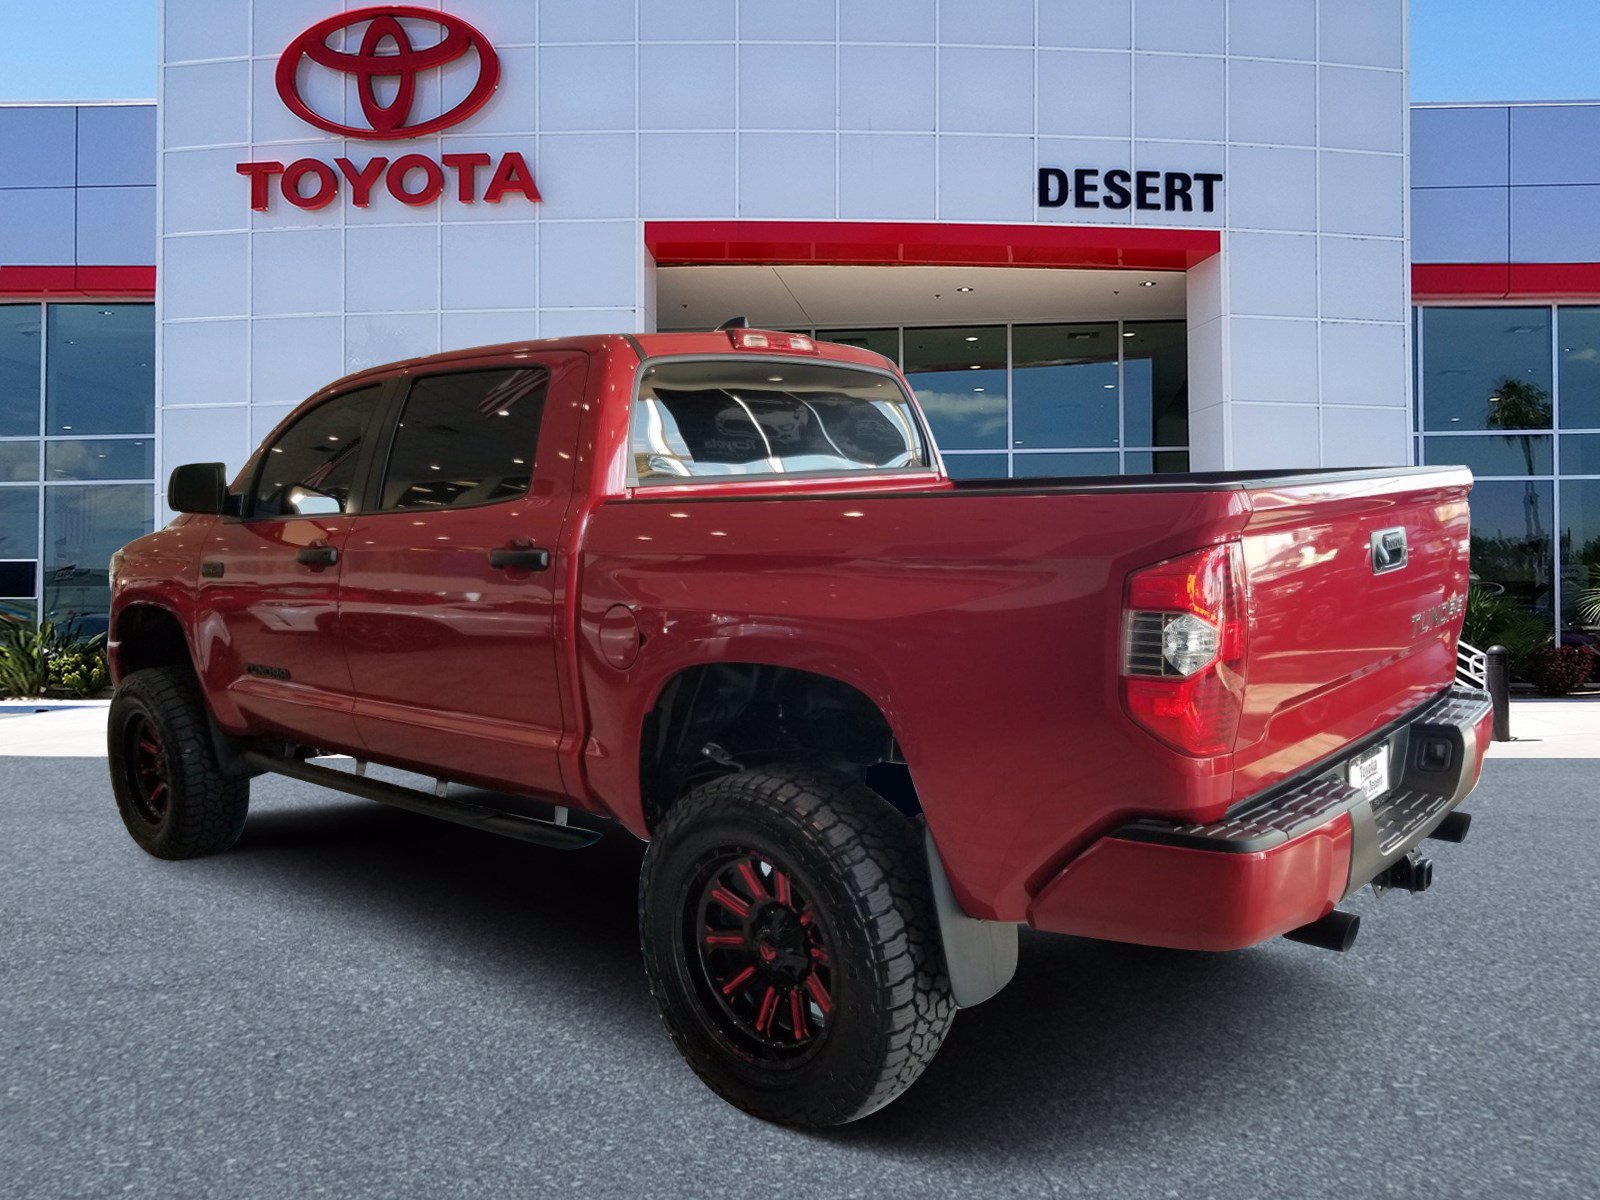 New 2020 Toyota Tundra 4WD SR5 Crew Cab Pickup in Cathedral City #